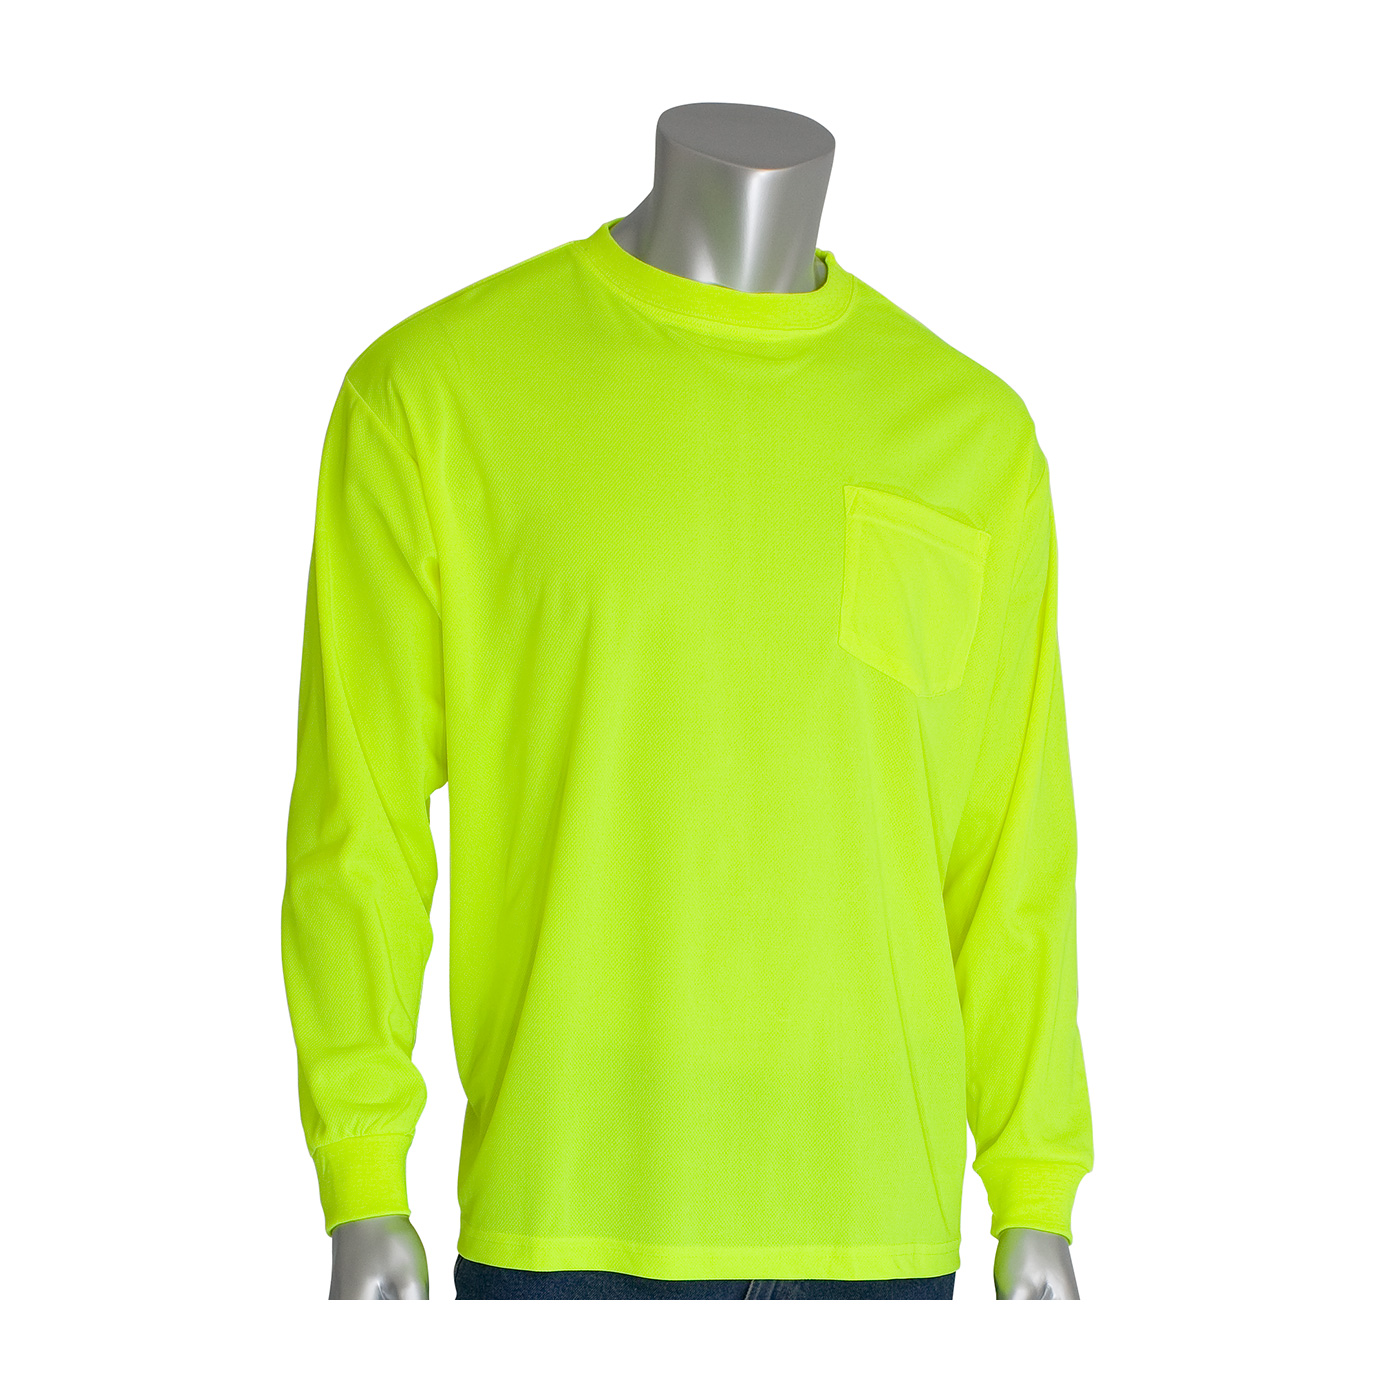 PIP Lime Non-ANSI Long Sleeve T-Shirt - Utility and Pocket Knives